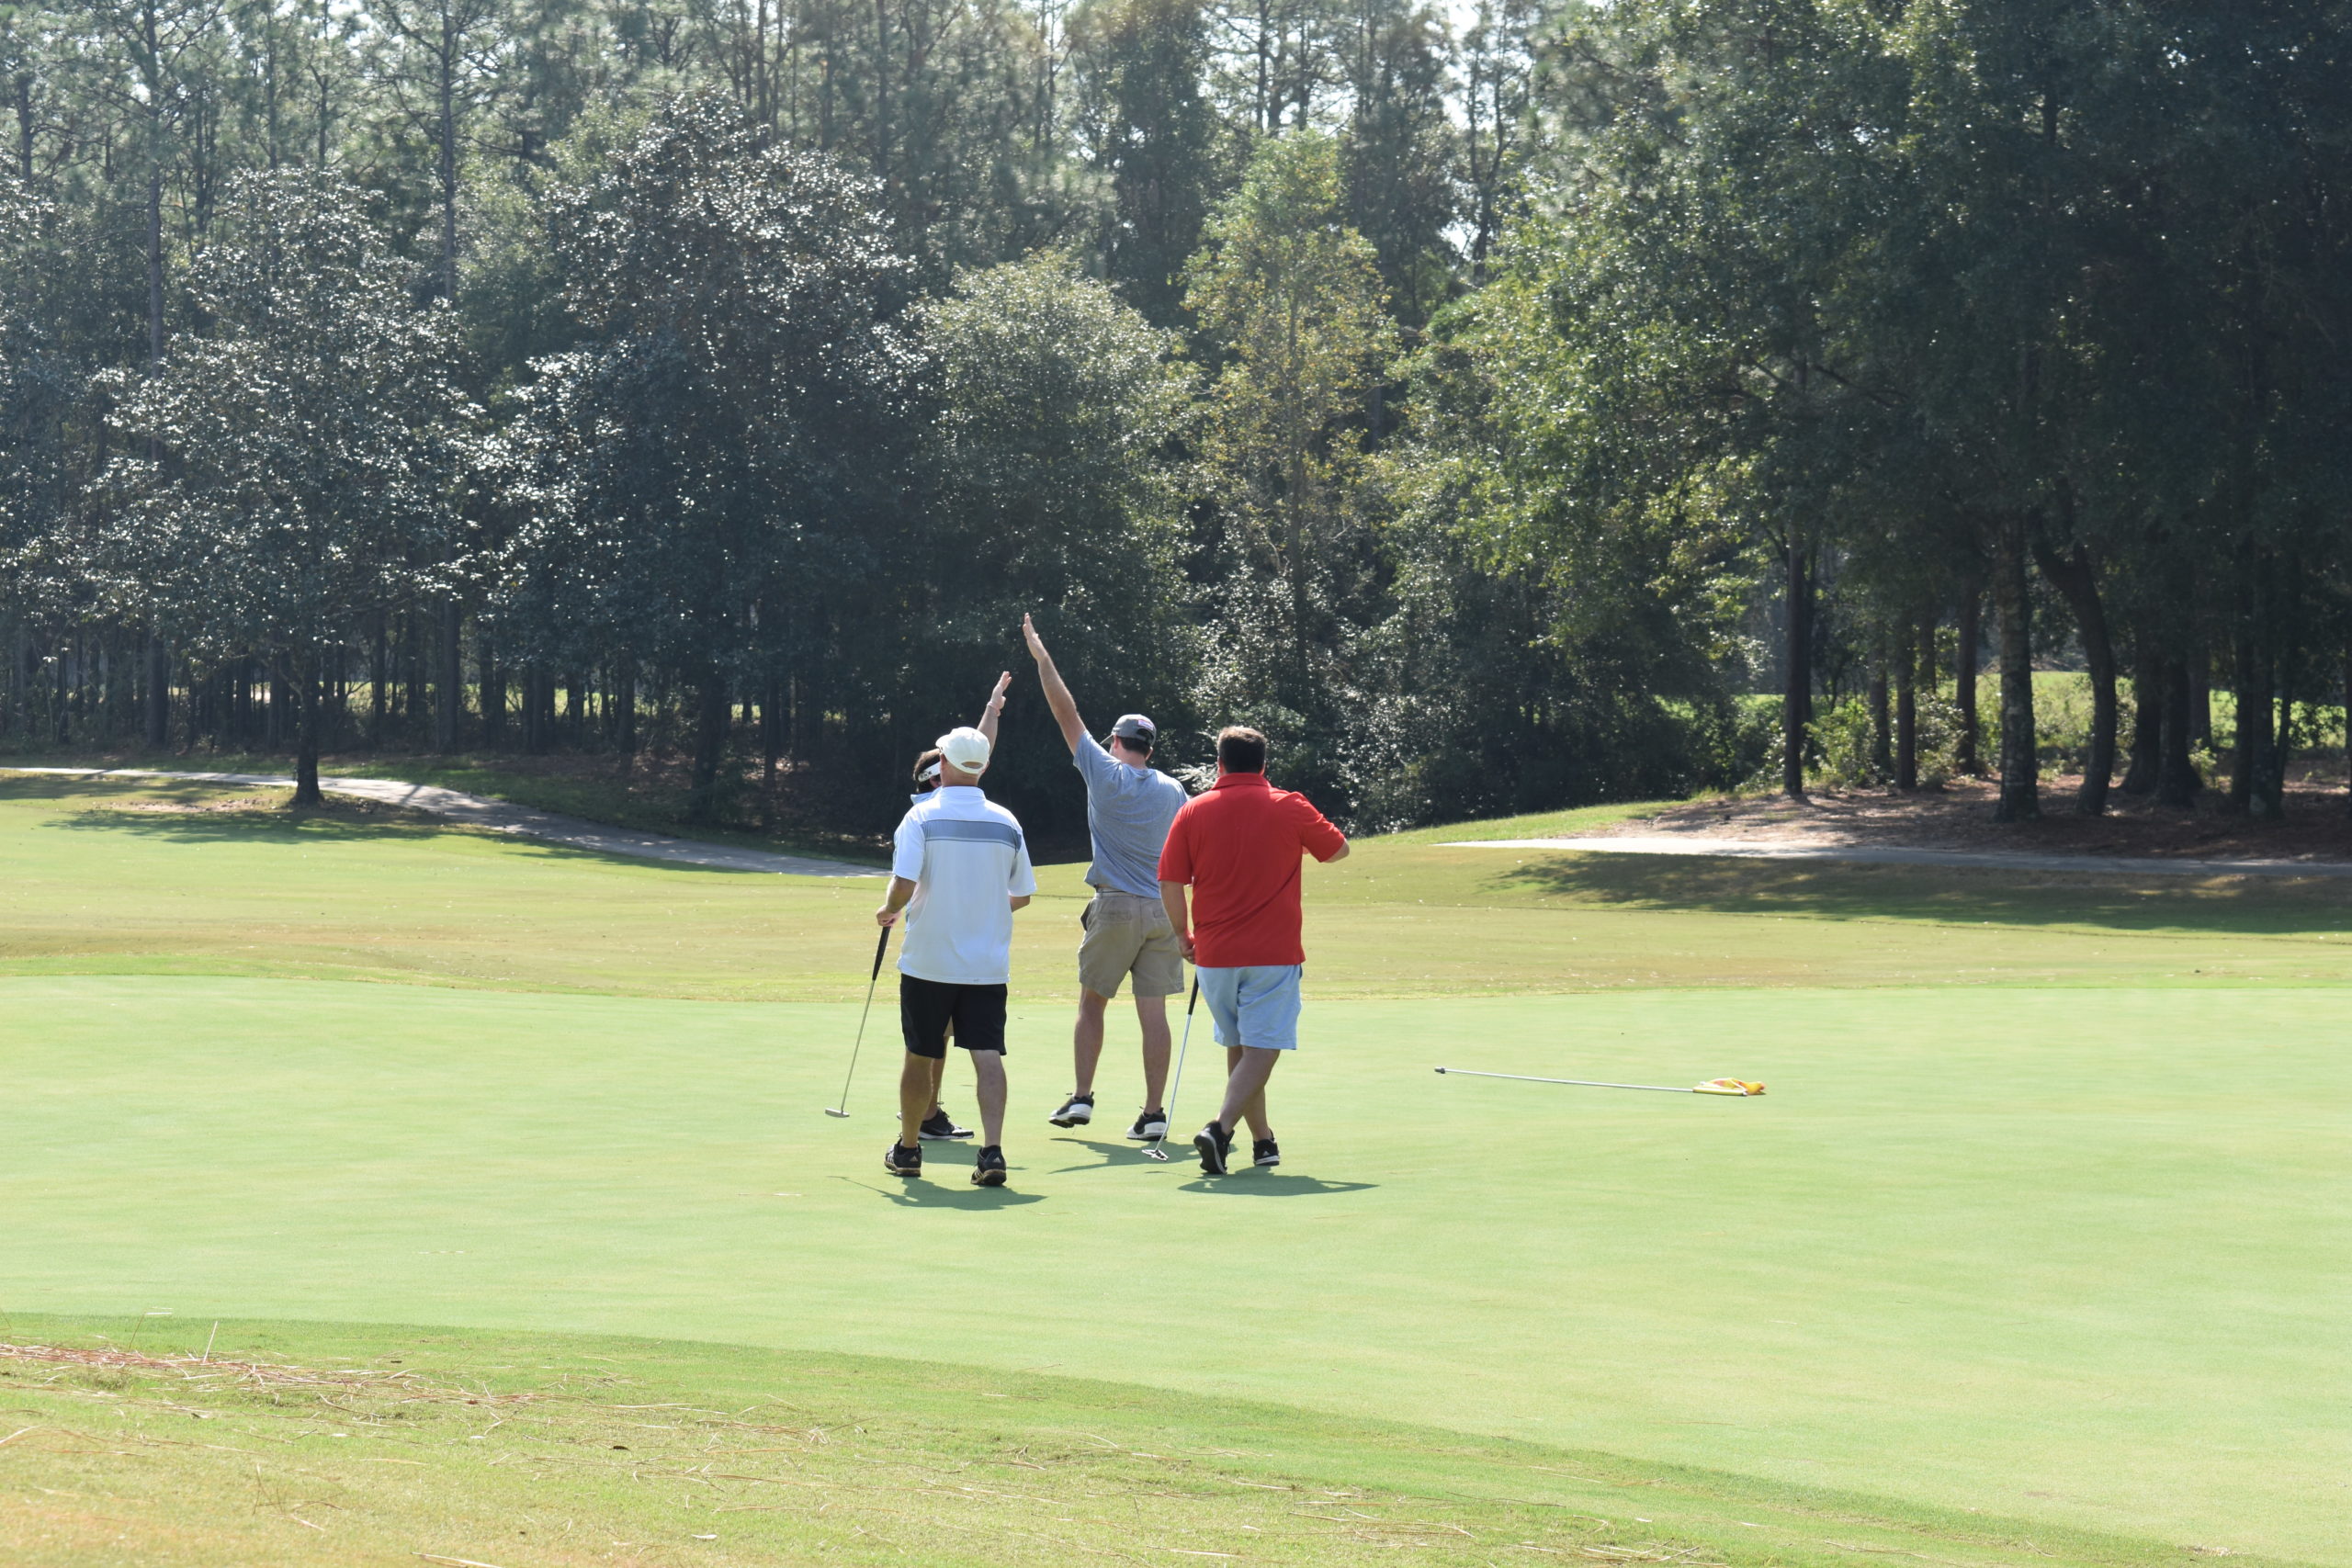 Golf Team Celebrates a put for Birdie as they participate in the 2019 Threaded Fasteners Charitable Foundation Weekend